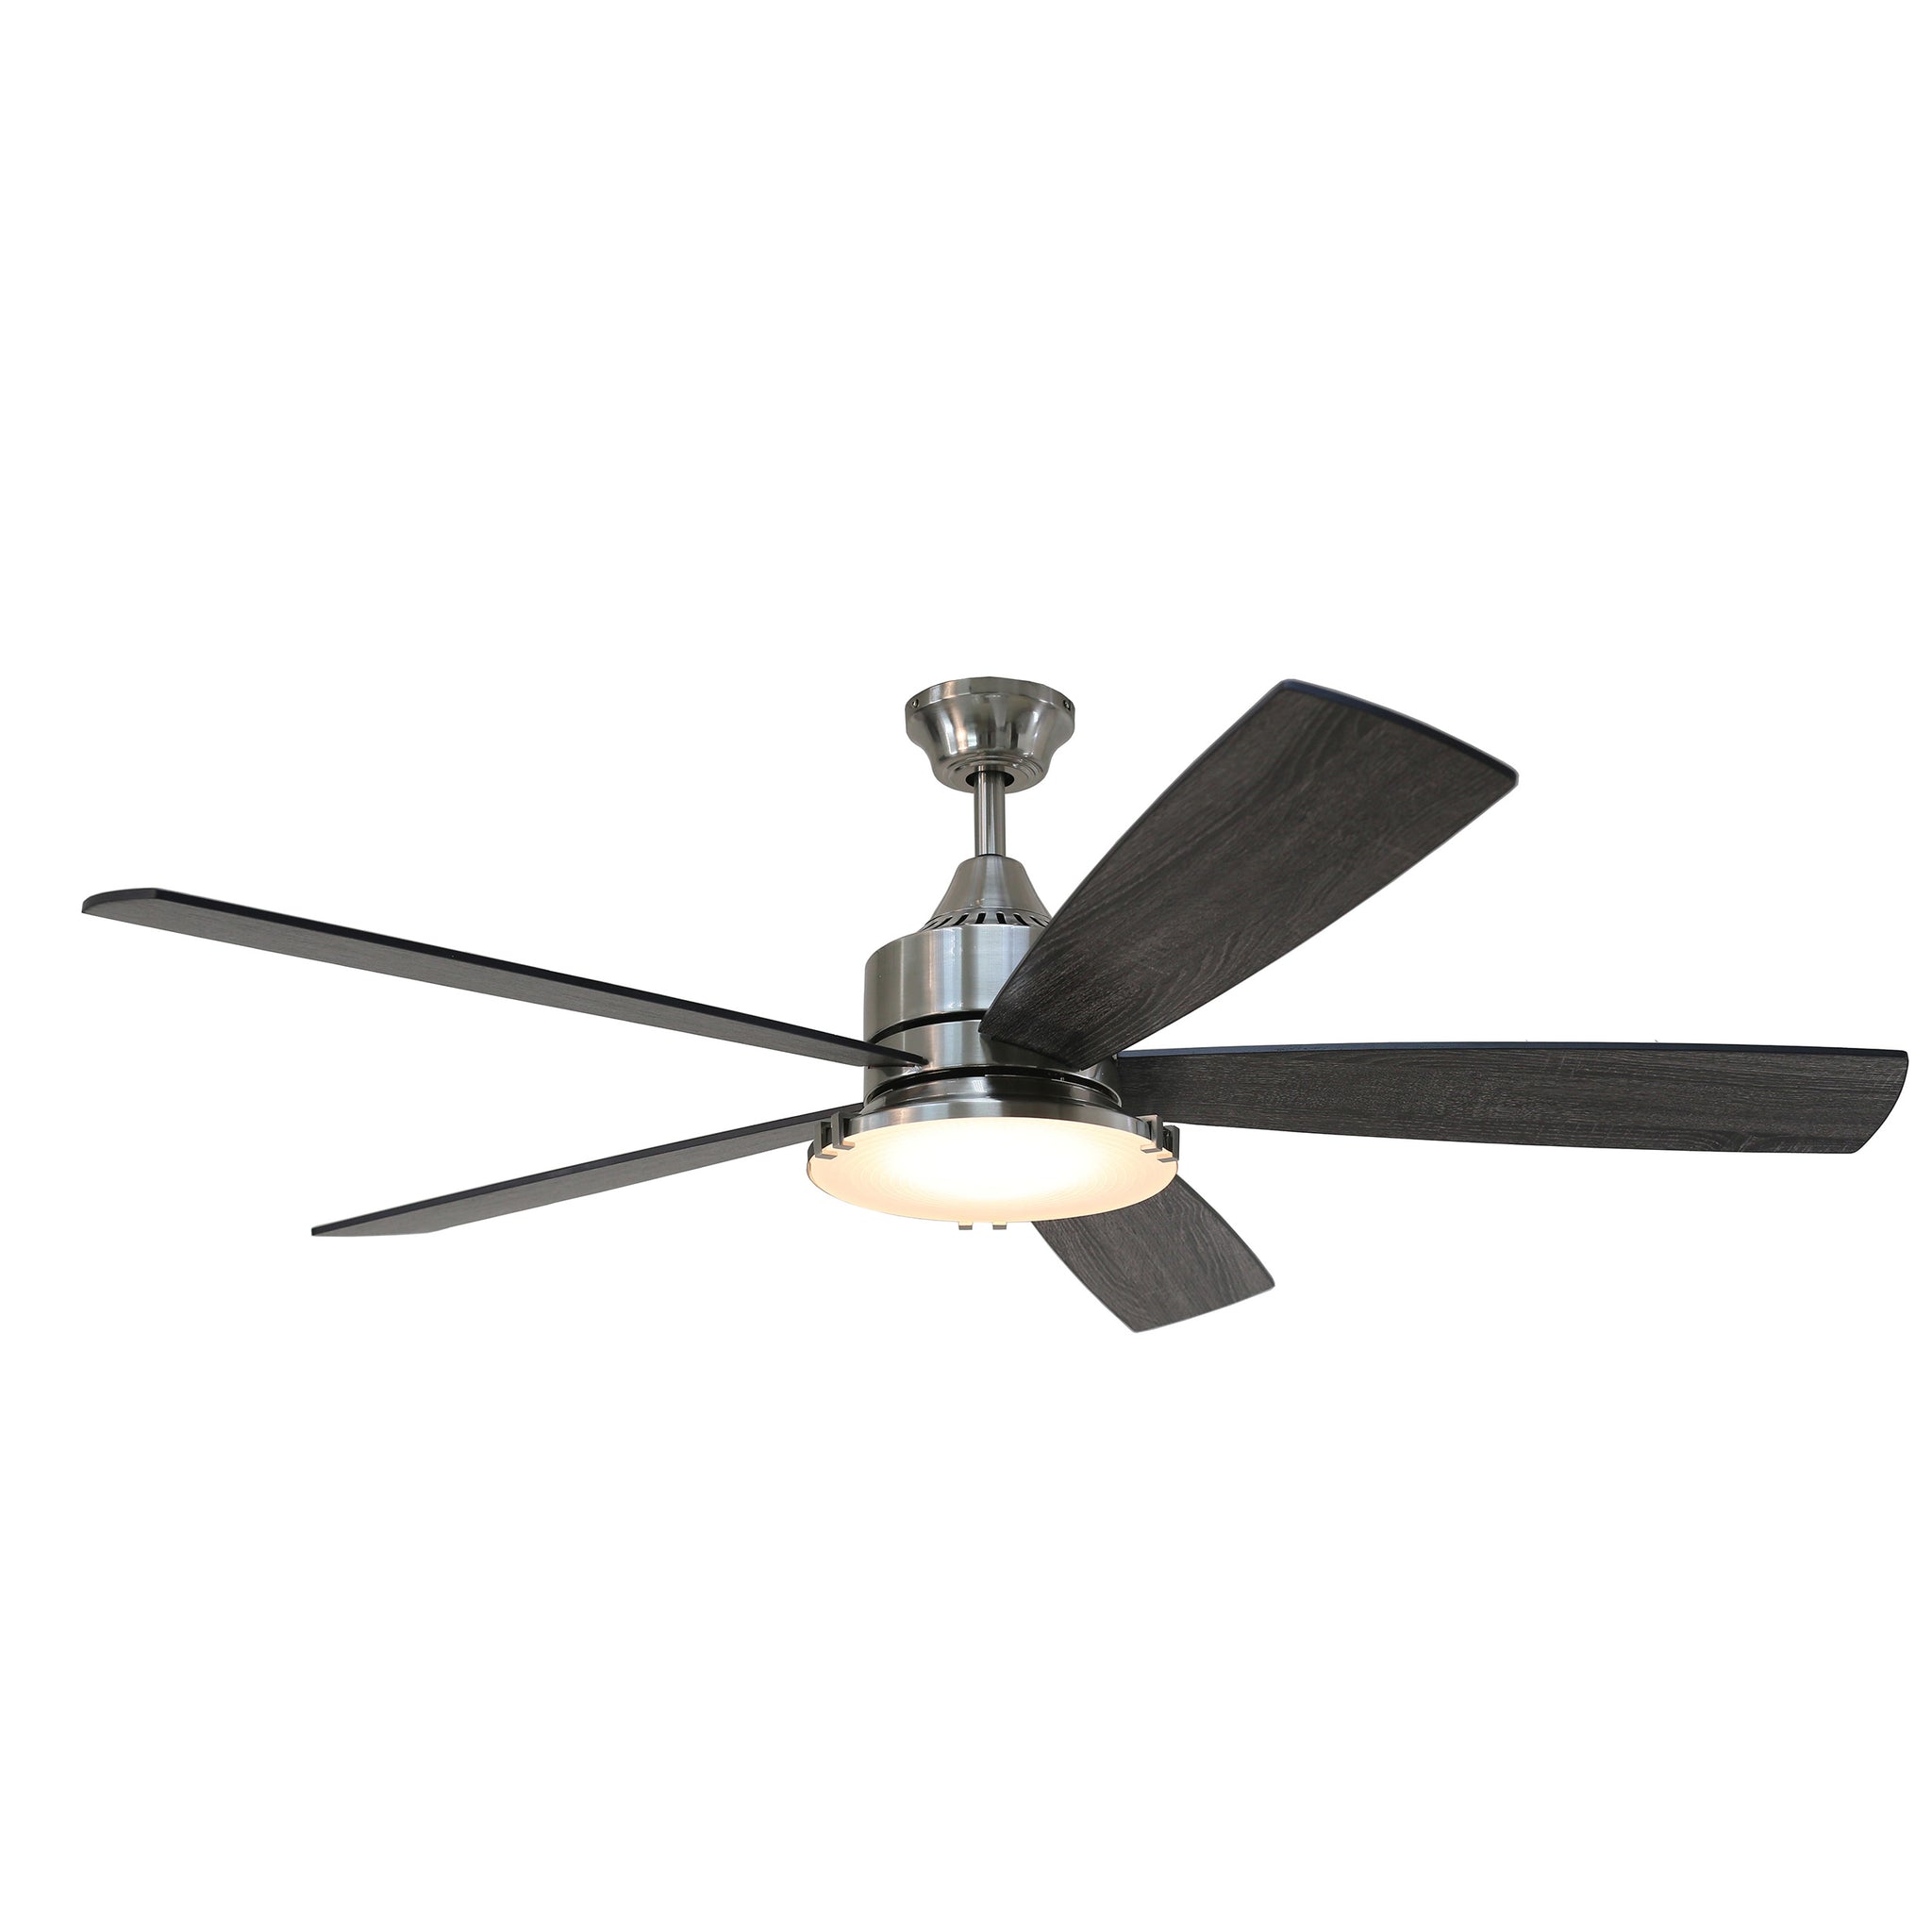 Maison Elite Faro 60 In. Voice Activated Smart Ceiling Fan in Brushed Nickel with Reversible Blade, CF01360-BNP